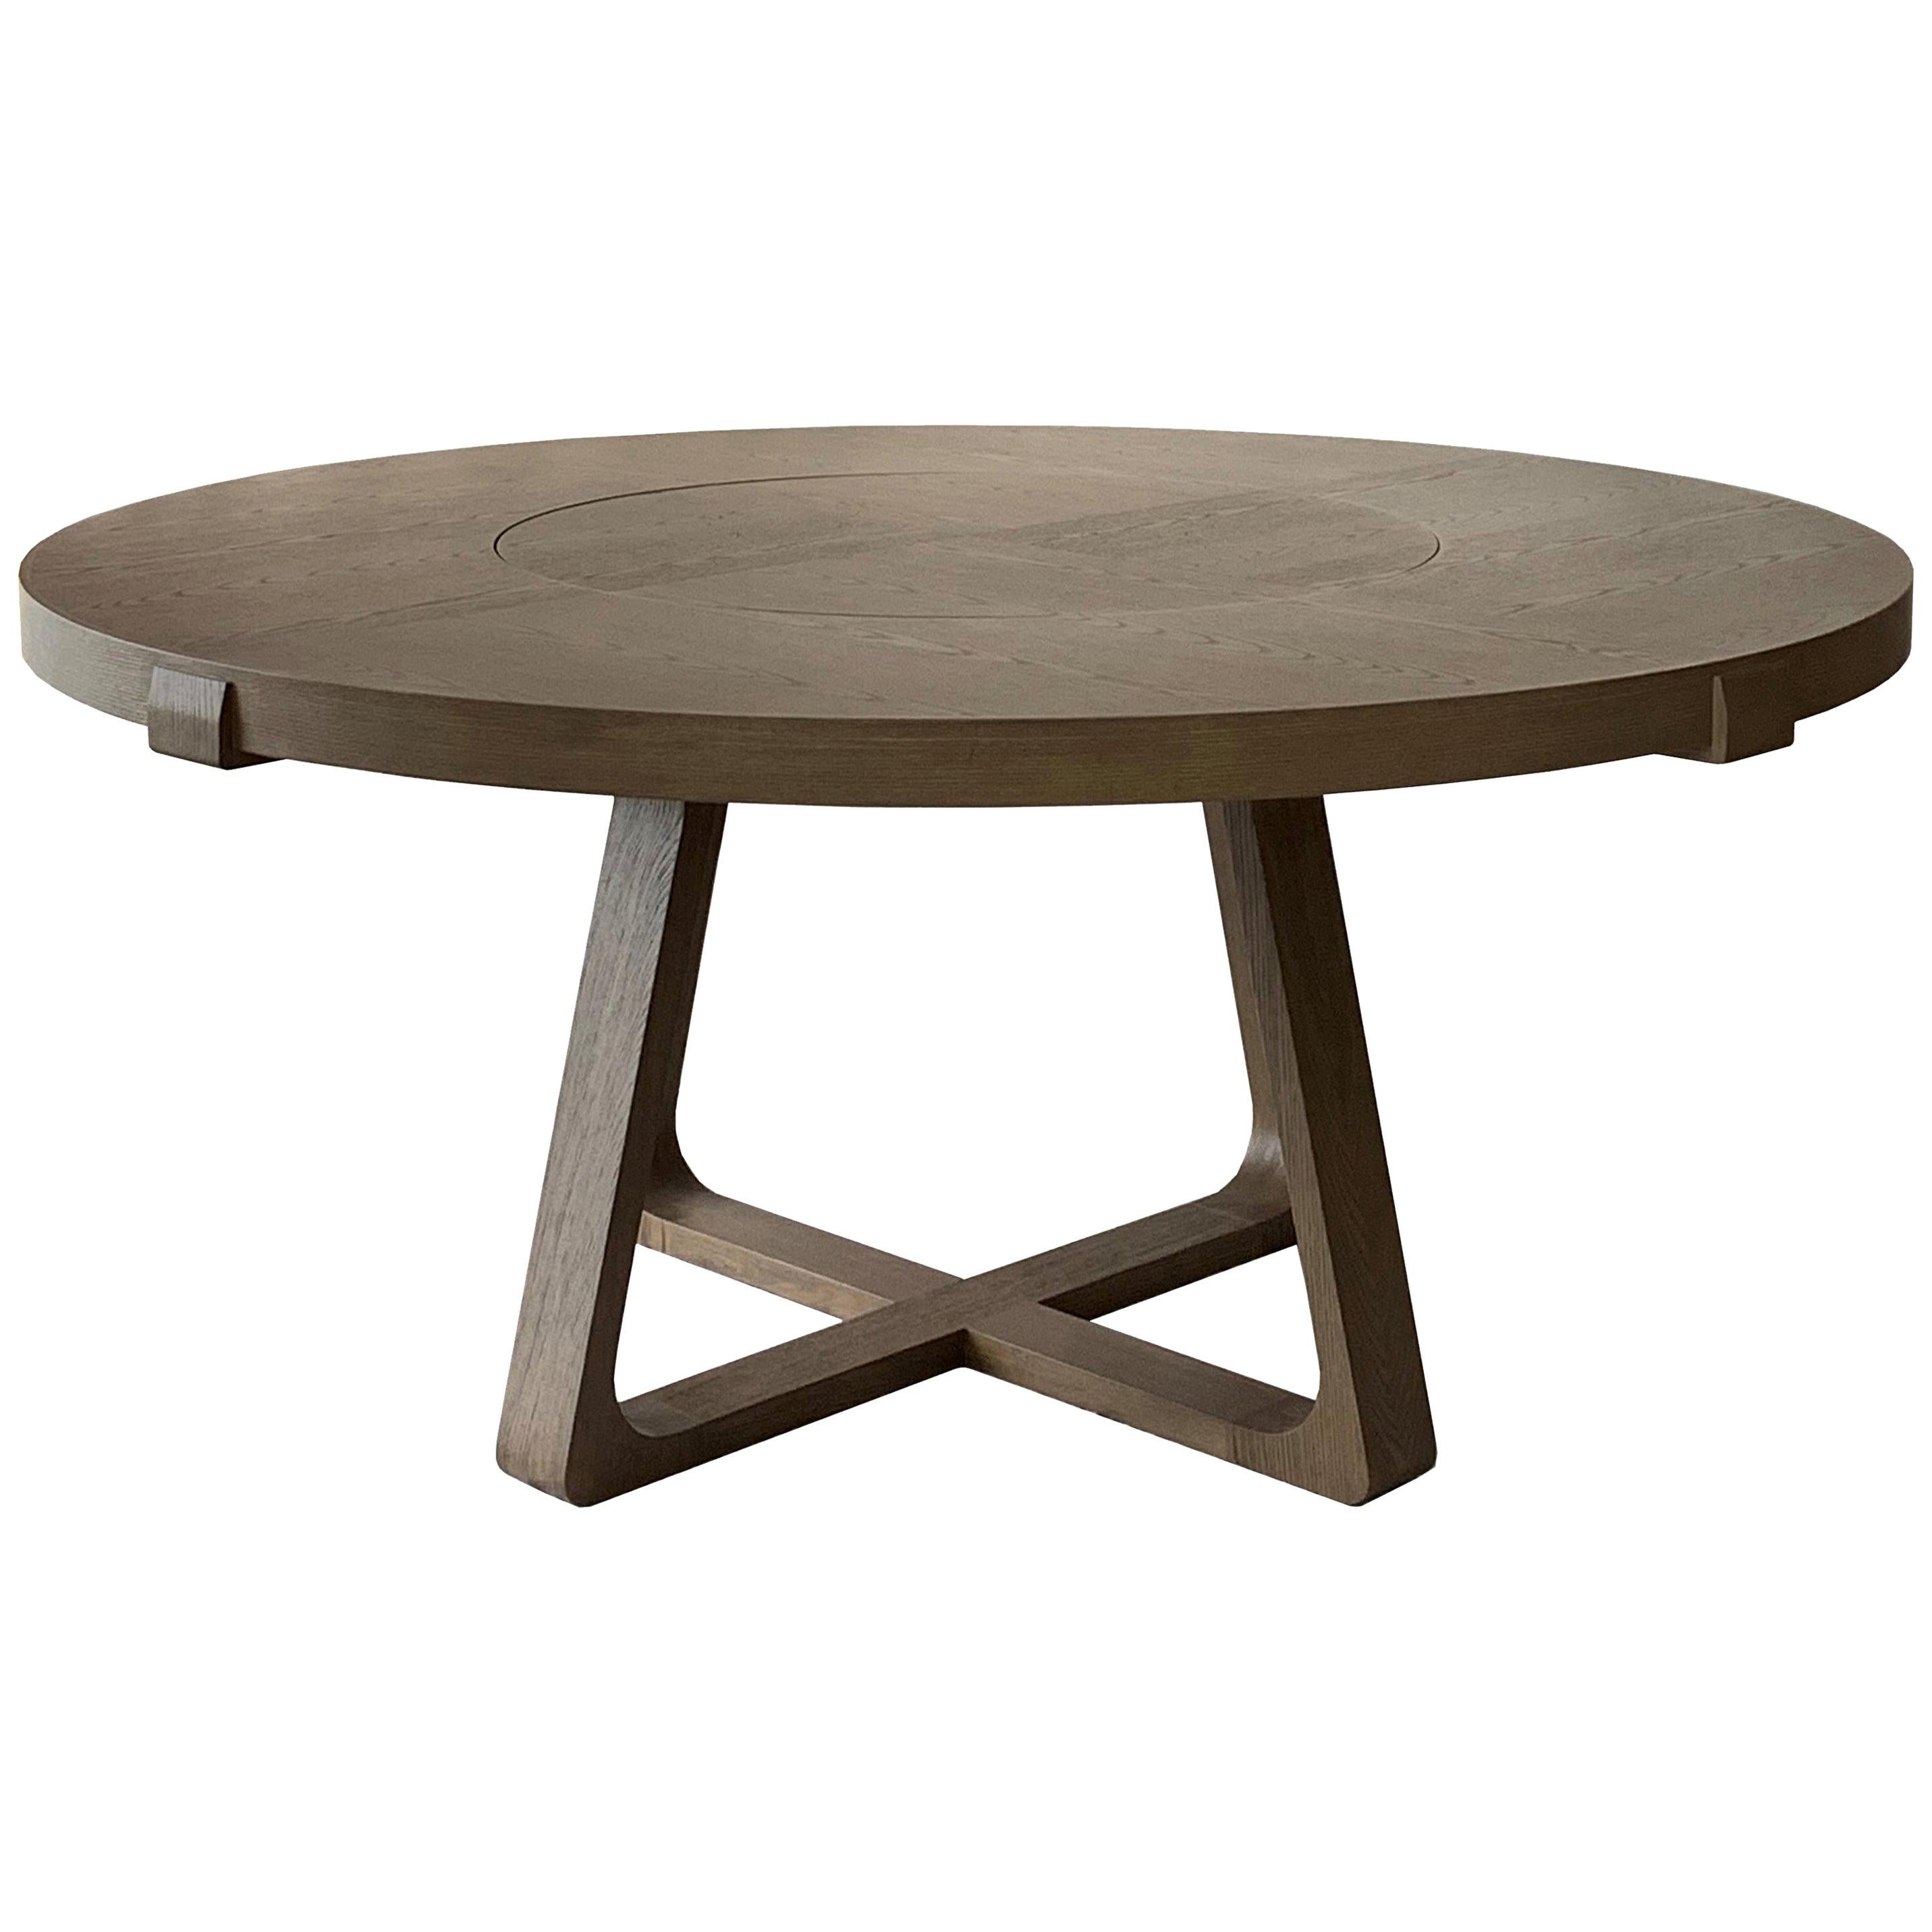 Round Dining Table with Lazy Susan 180cm Interlock André Fu Living Grey Oak